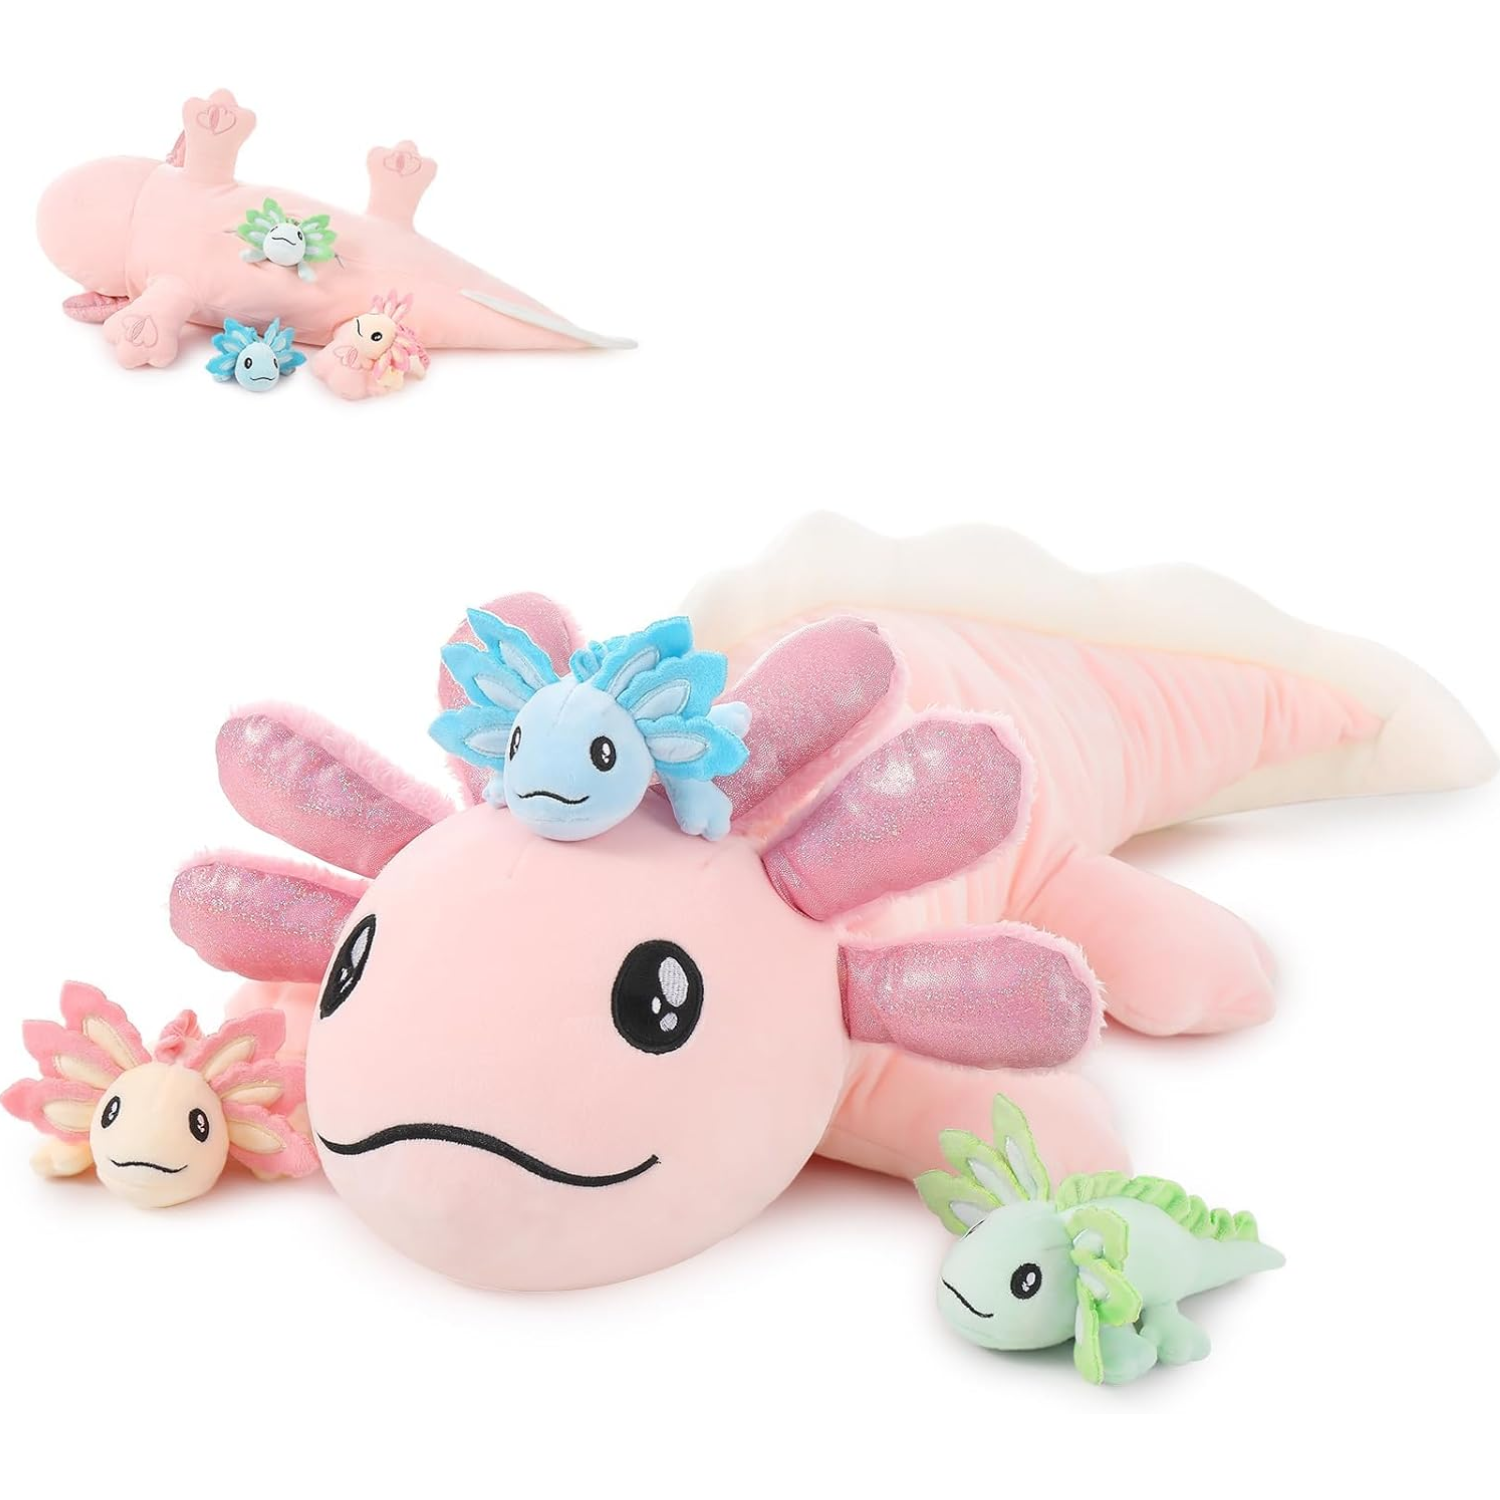 Axolotl Plushie with 3 Babies, 31.5 Inches